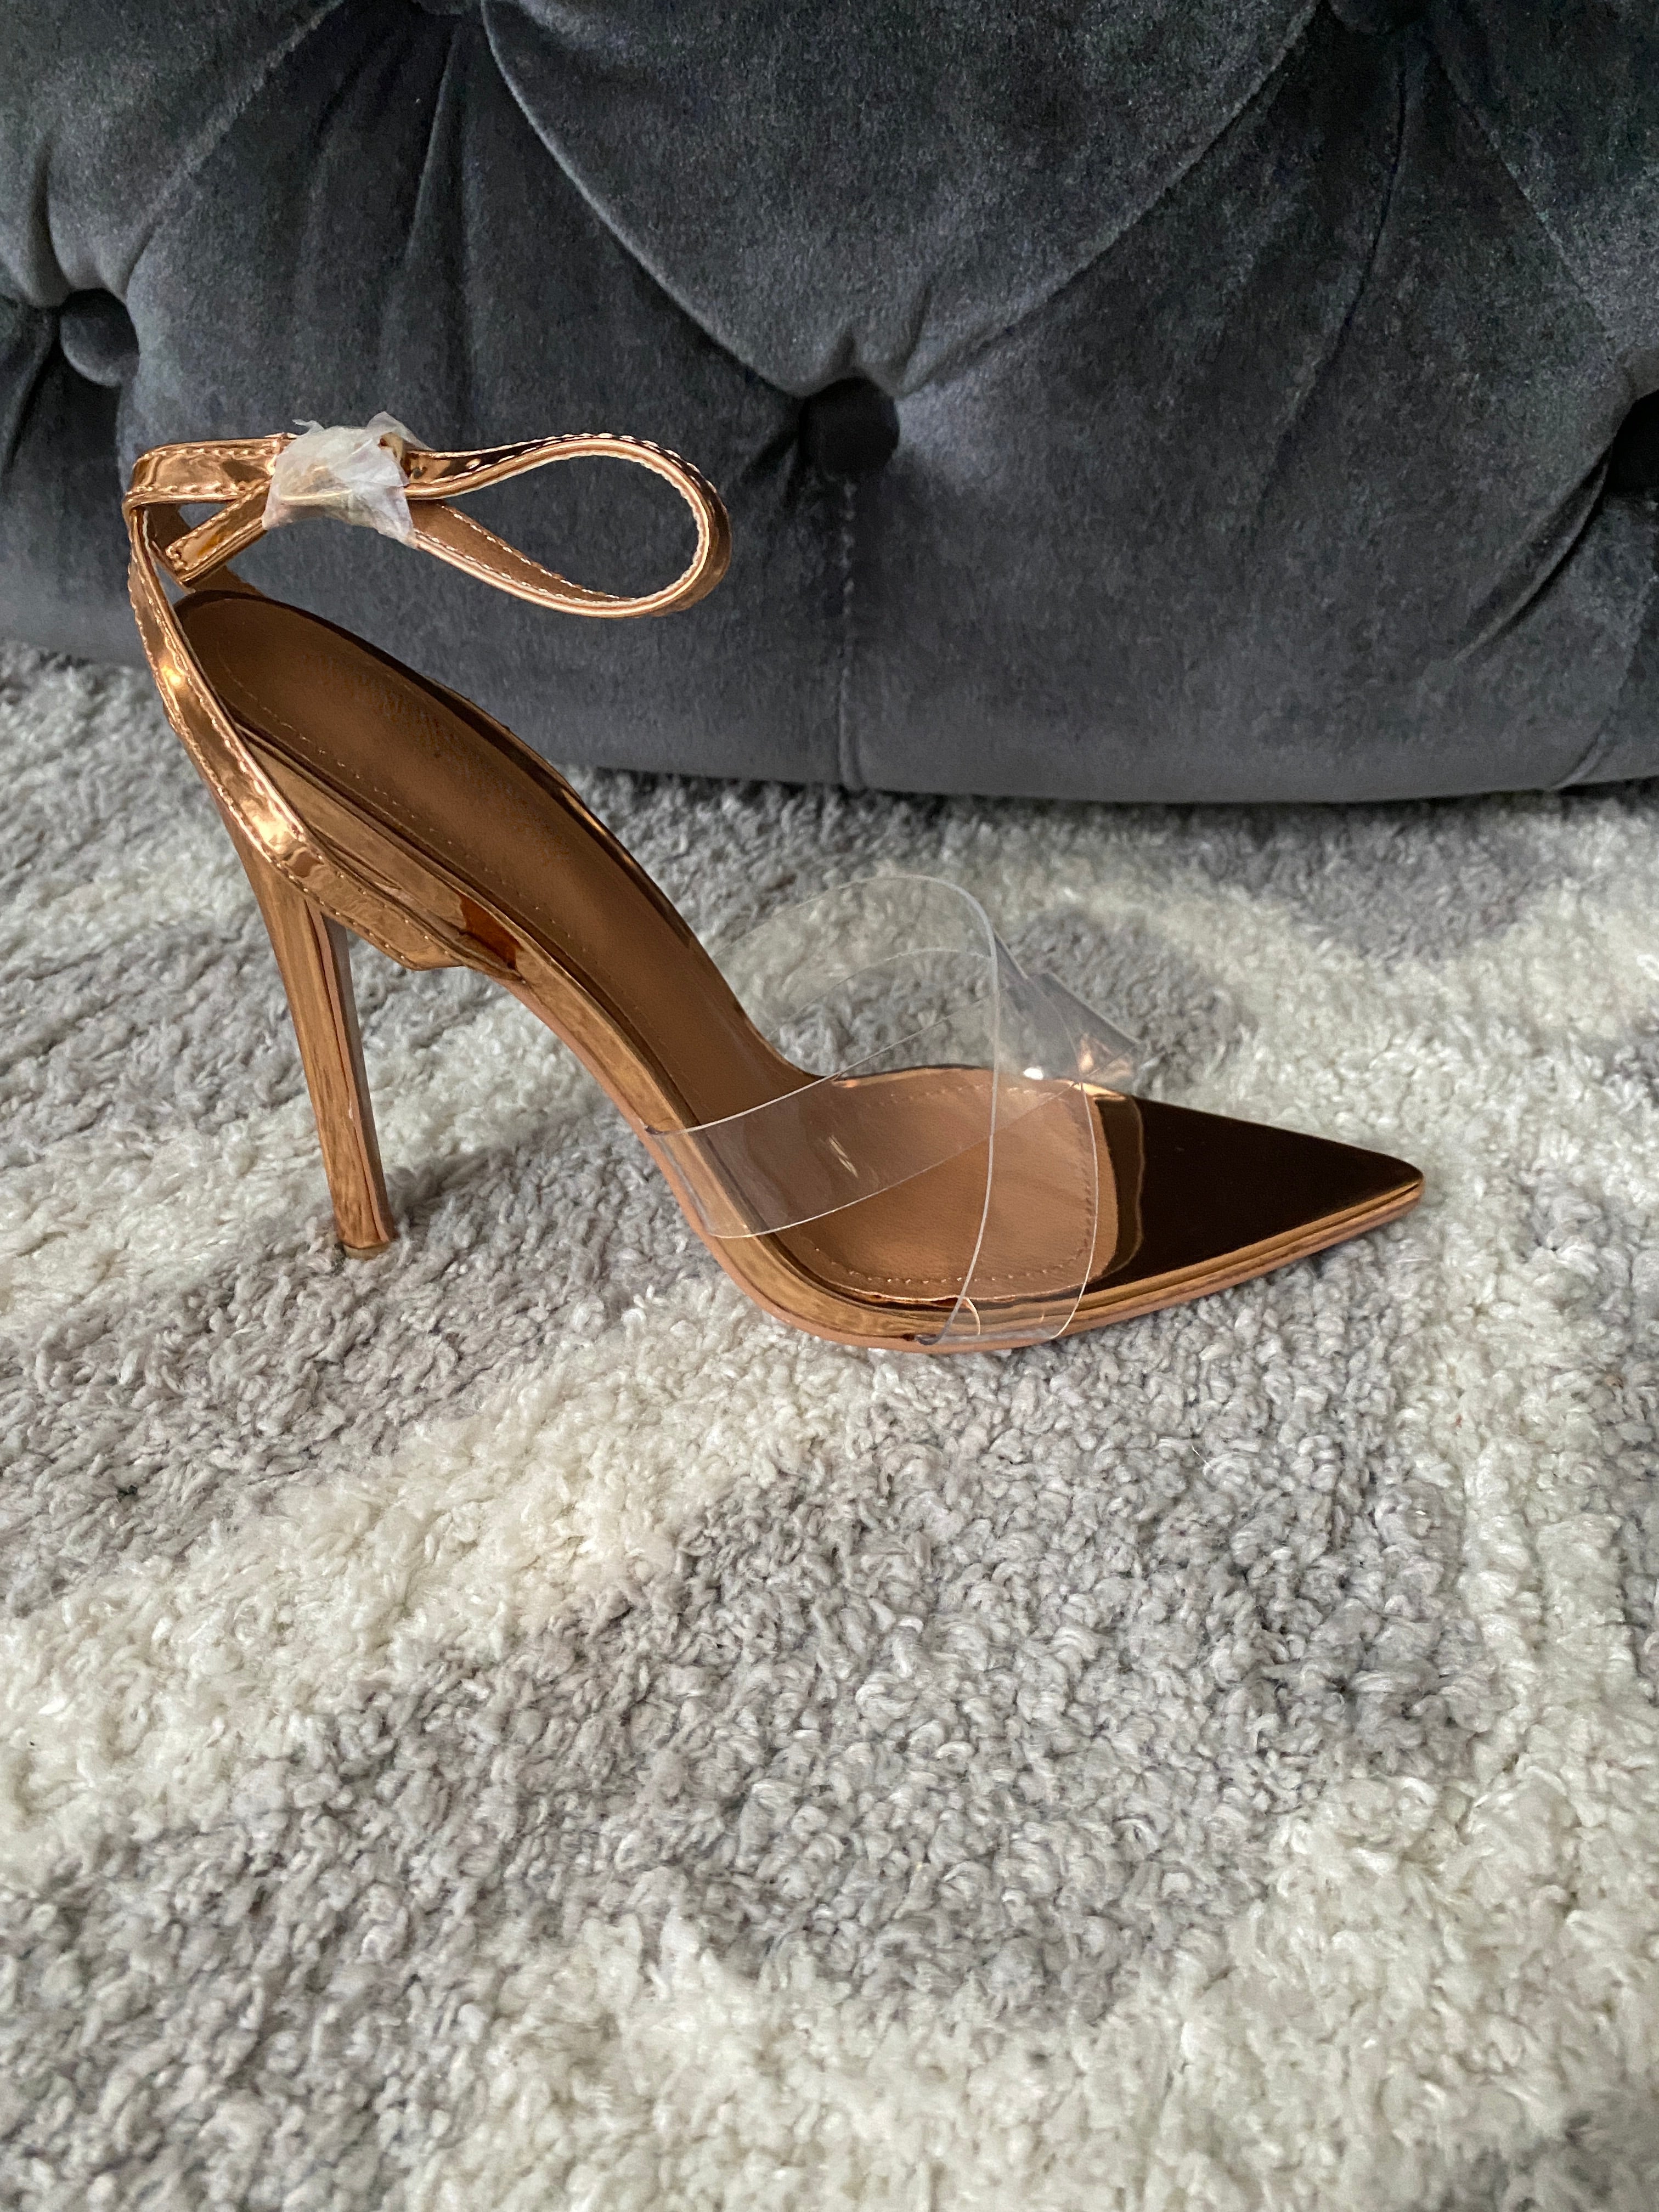 Buy Ankis Nude Heels for Women, Open Toe Ankle Strap Chunky Heel, Pump  Sandals Evening Dress Party Wedding Strappy Buckle Sandals 2.75 Inch High  with Different Colors (Nude Suede, numeric_5) at Amazon.in